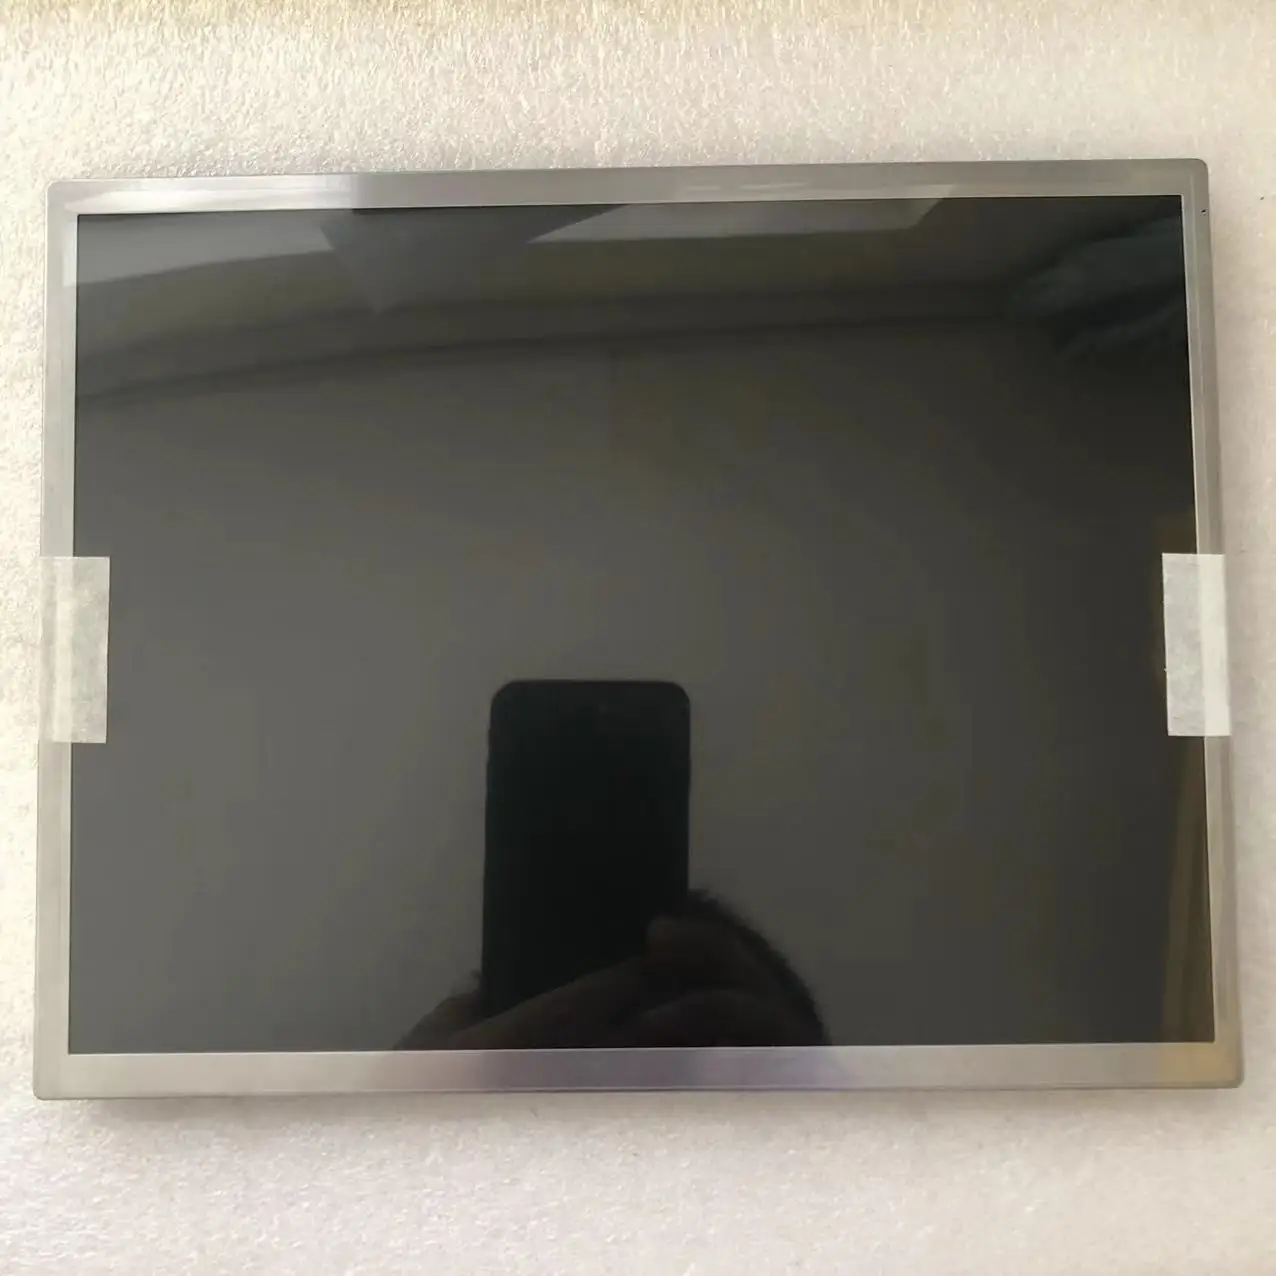 For 8.4-inch NL6448AC33-A1D LCD Screen Display Panel Fully Tested Before Shipment for 10 4 inch aa104vj02 lcd screen display panel fully tested before shipment